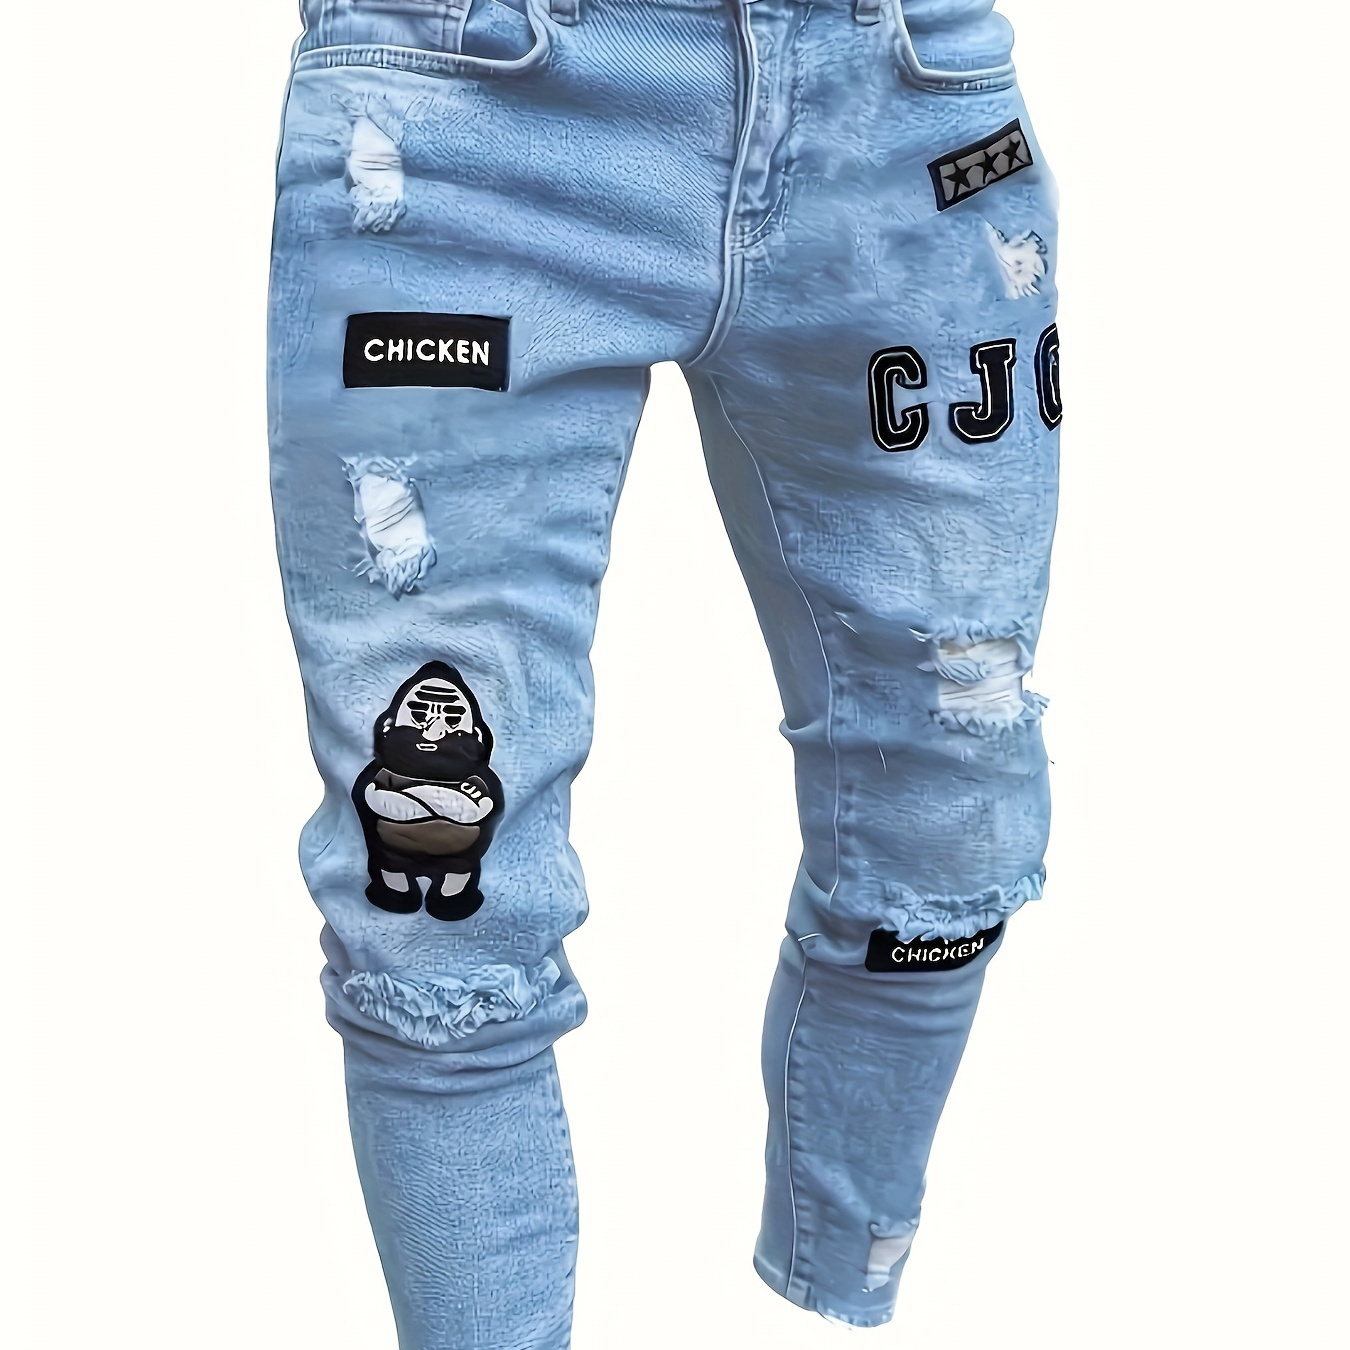 

Men's Cute Man Embroidery Print Washed Denim Trousers With Pockets, Causal Cotton Blend Slim-fit Jeans For Outdoor Activities